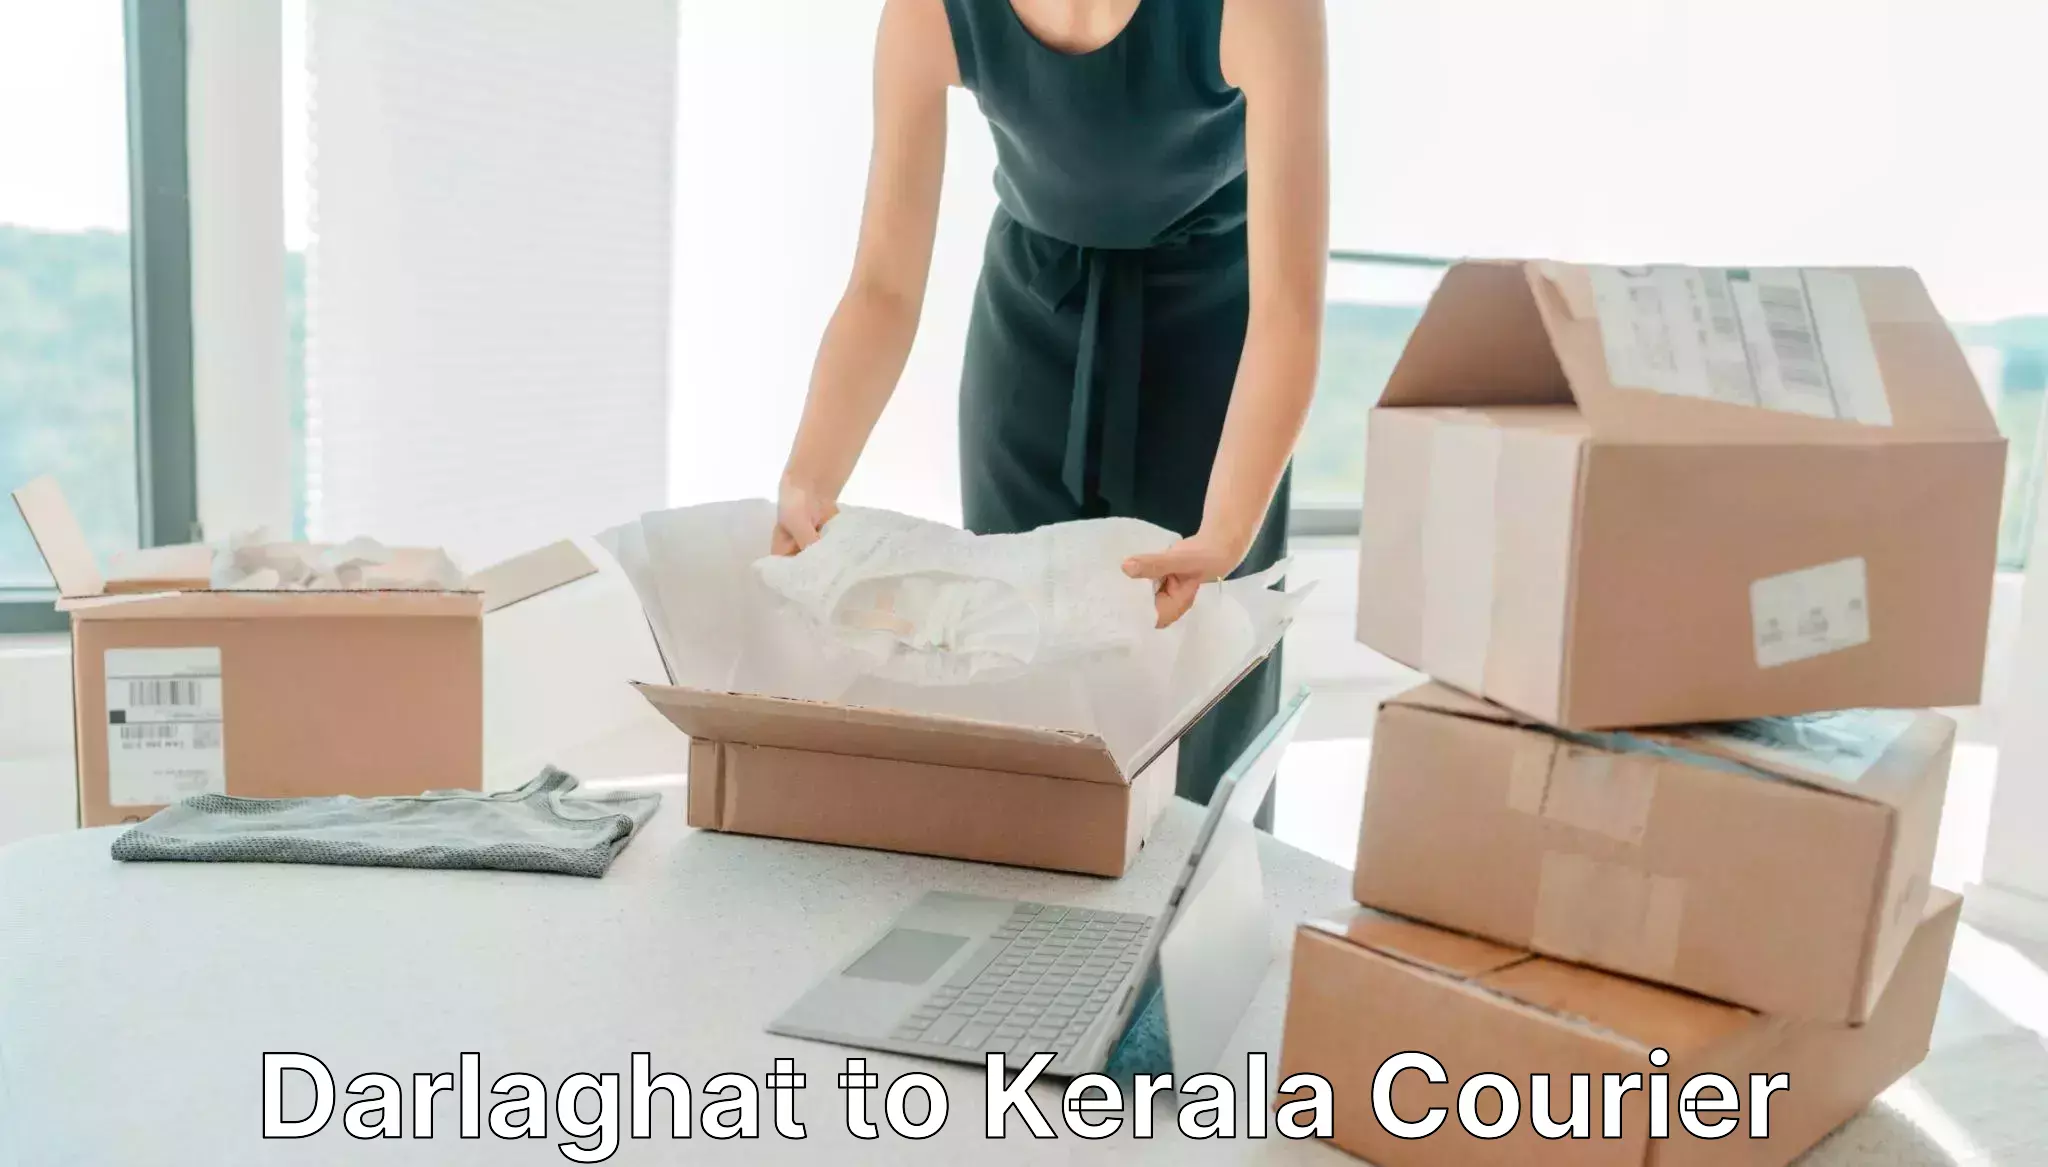 Fast-track shipping solutions Darlaghat to Cochin Port Kochi